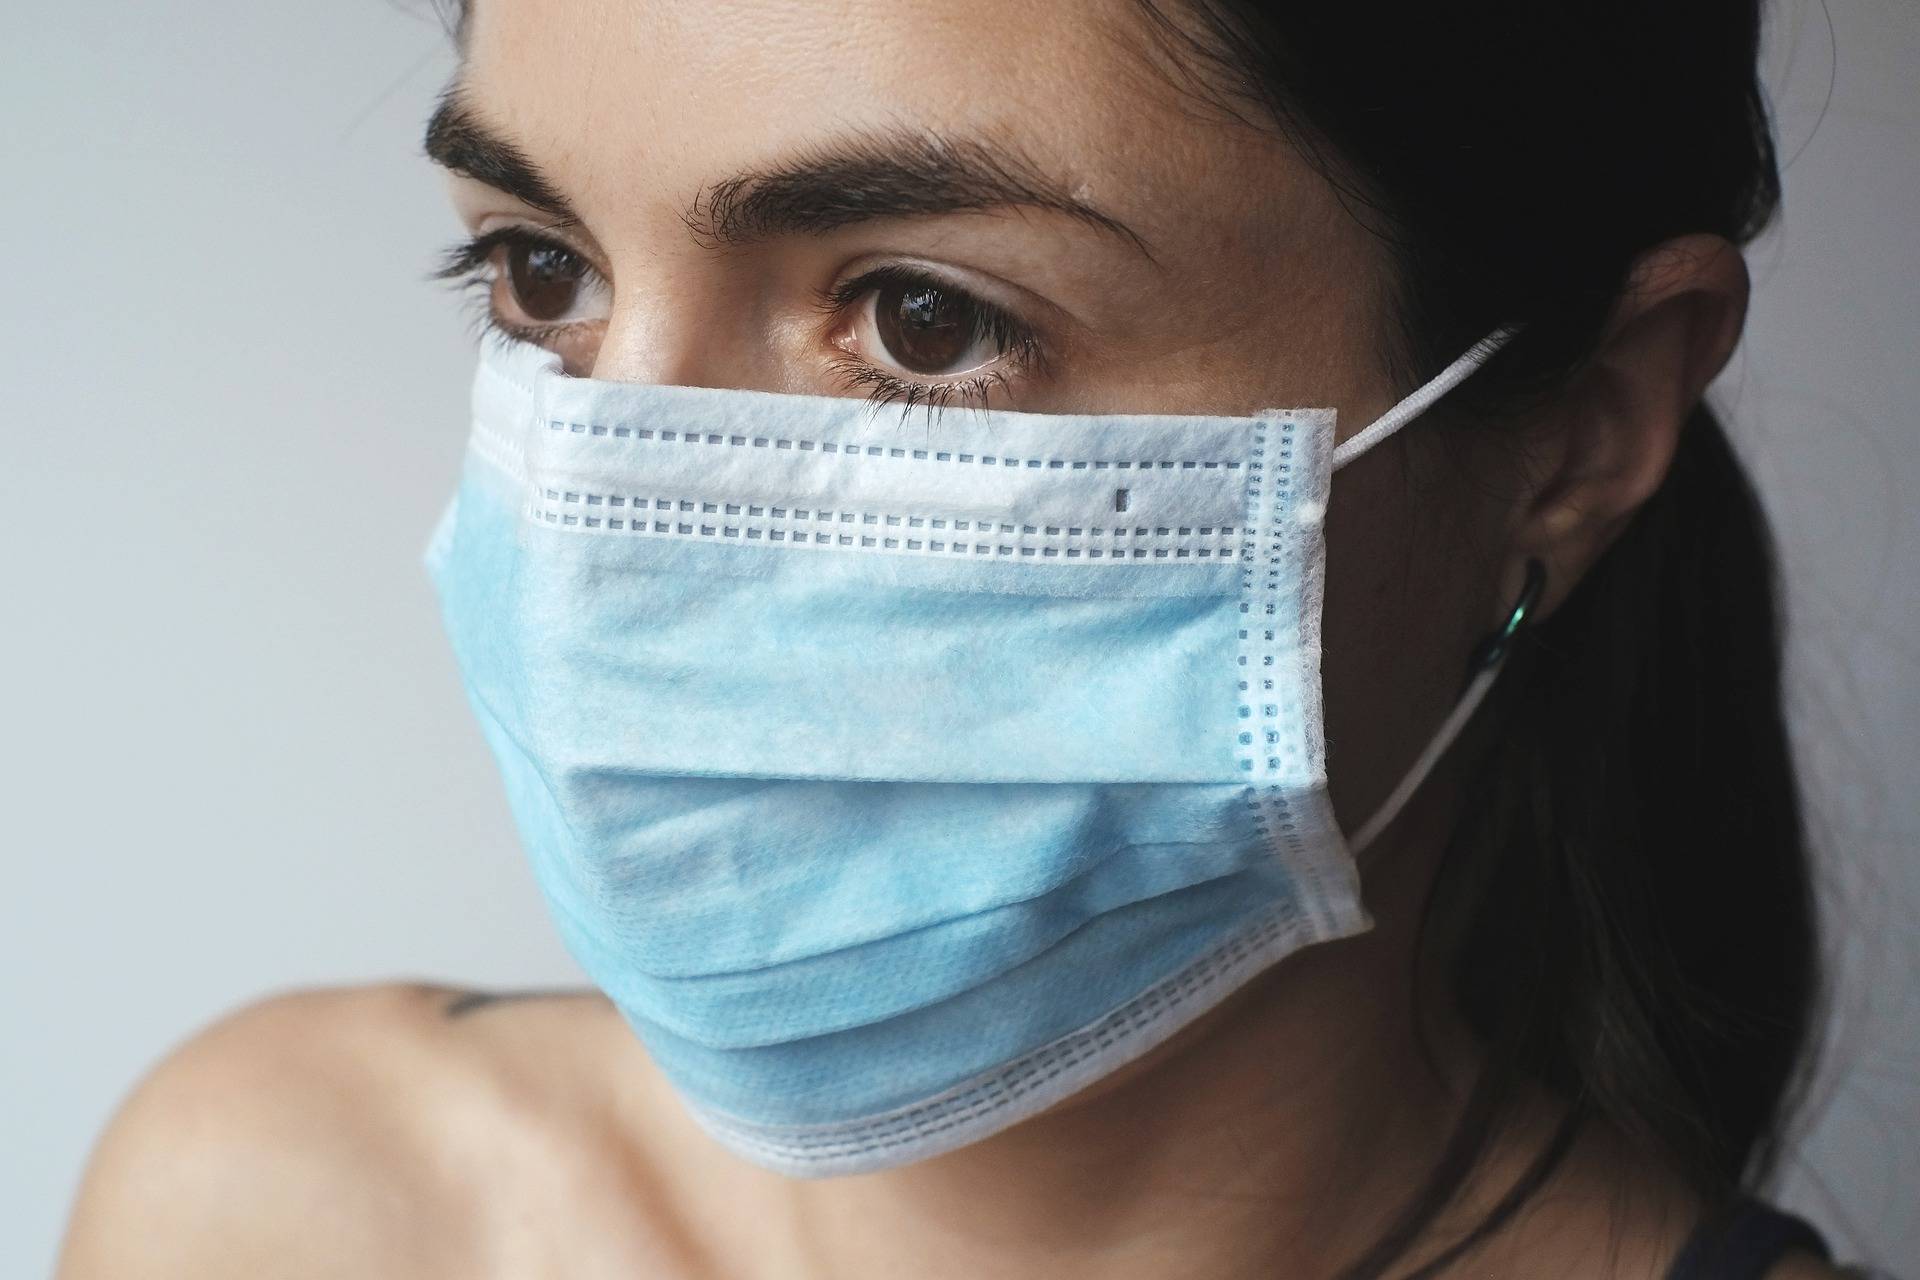 Department of Health highlights importance of face coverings, shares additional information